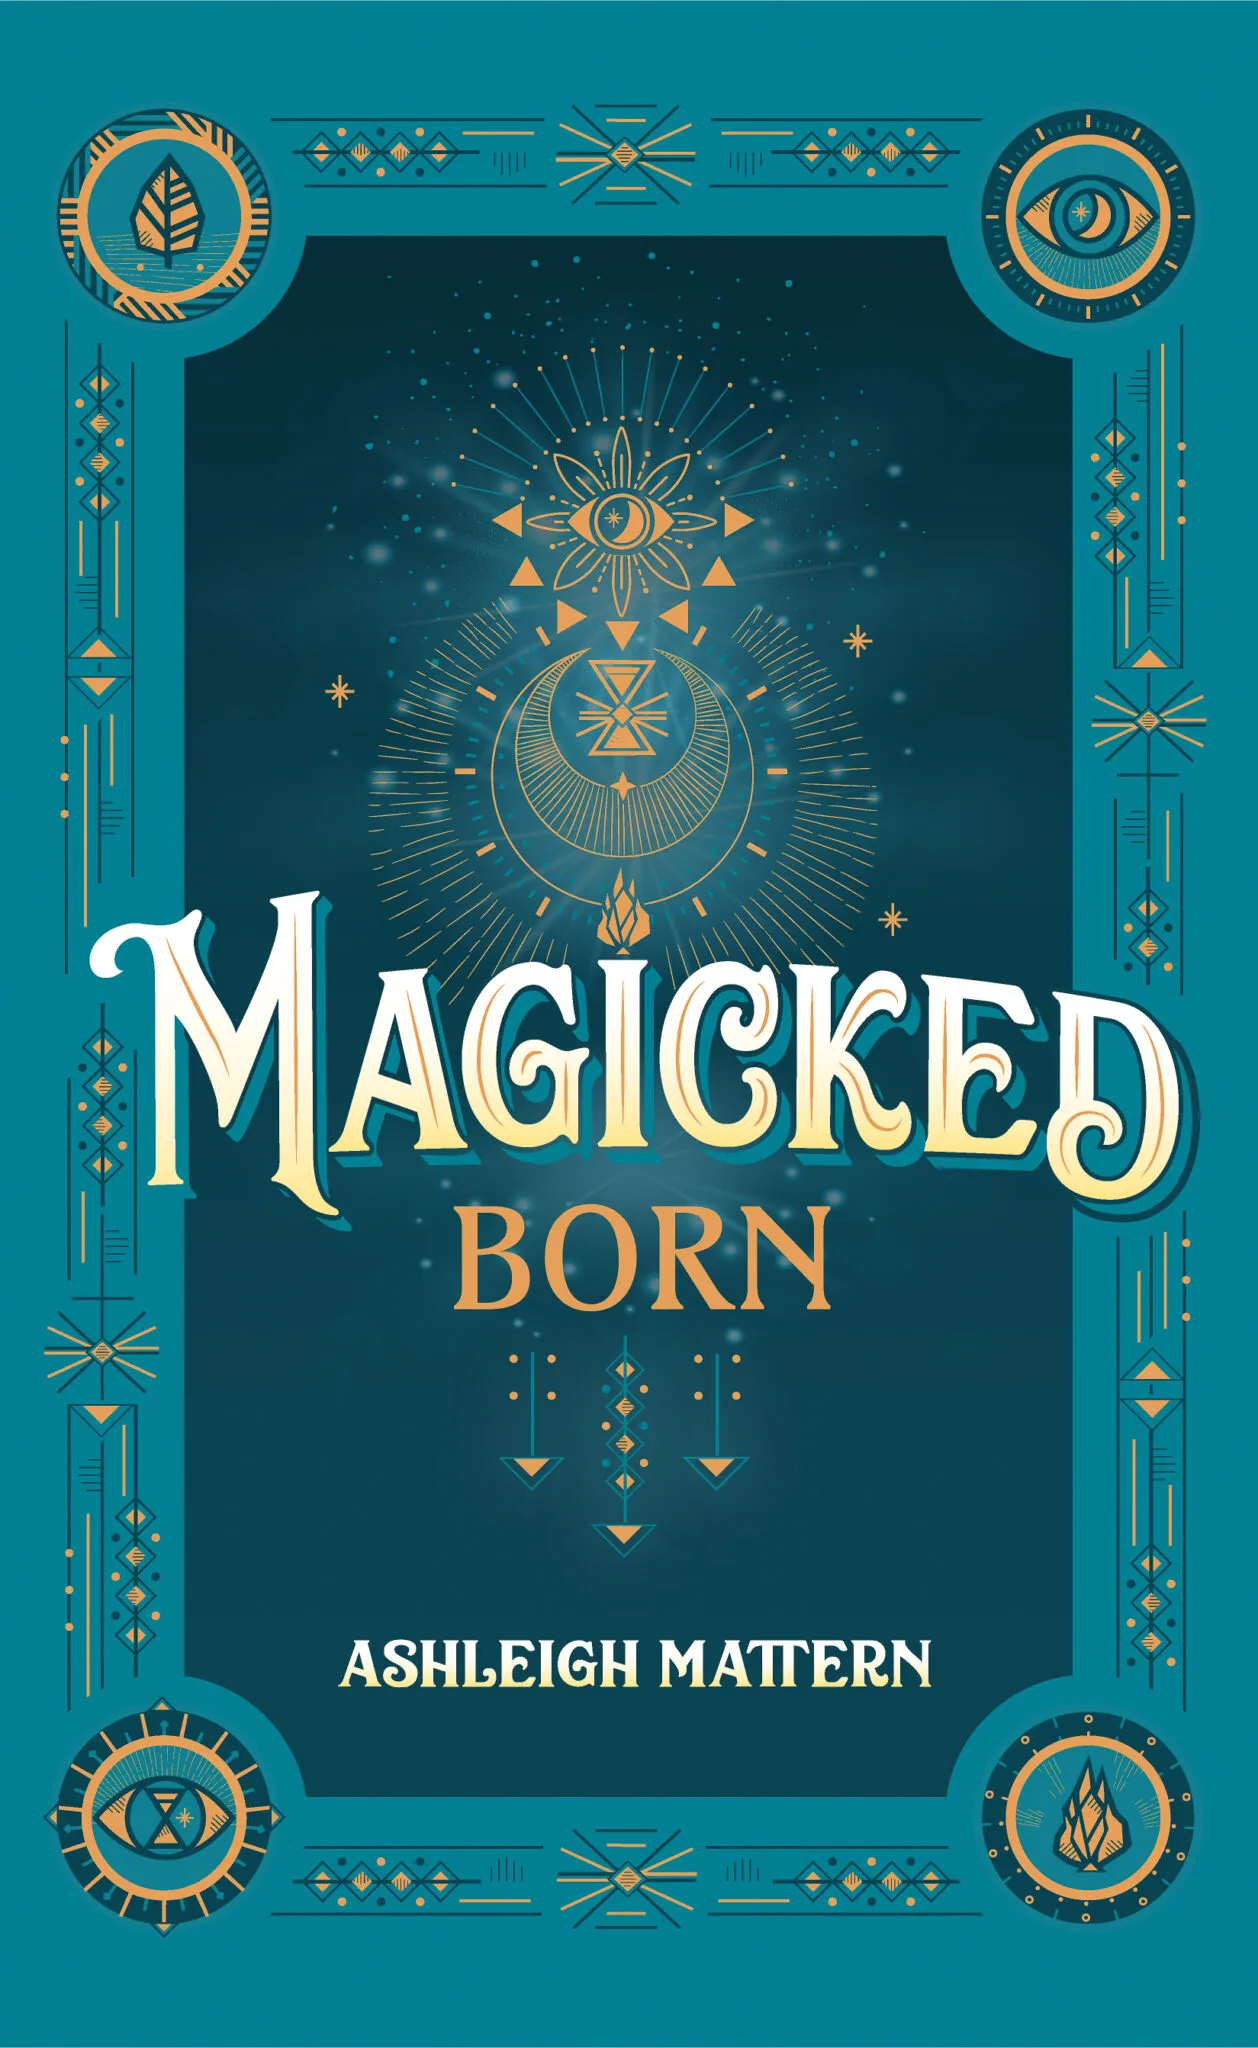 The book cover of Magicked